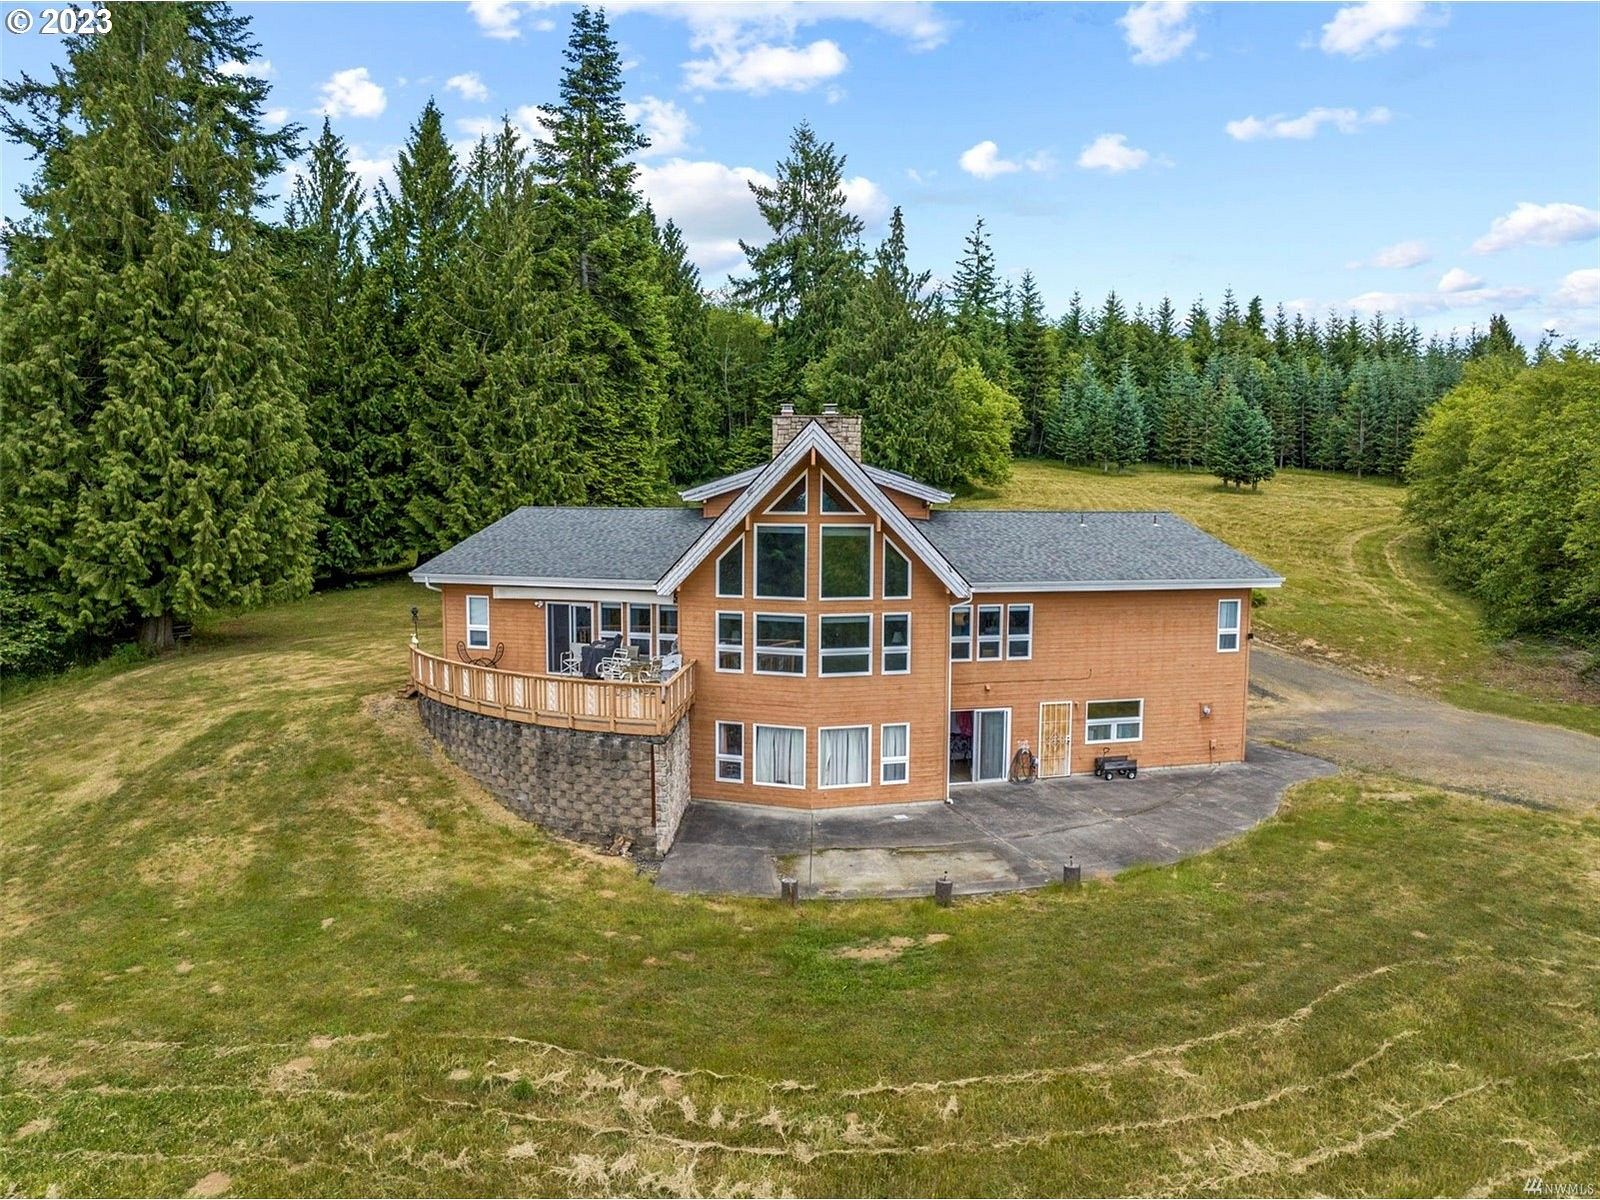 94.5 Acres of Land with Home for Sale in Longview, Washington